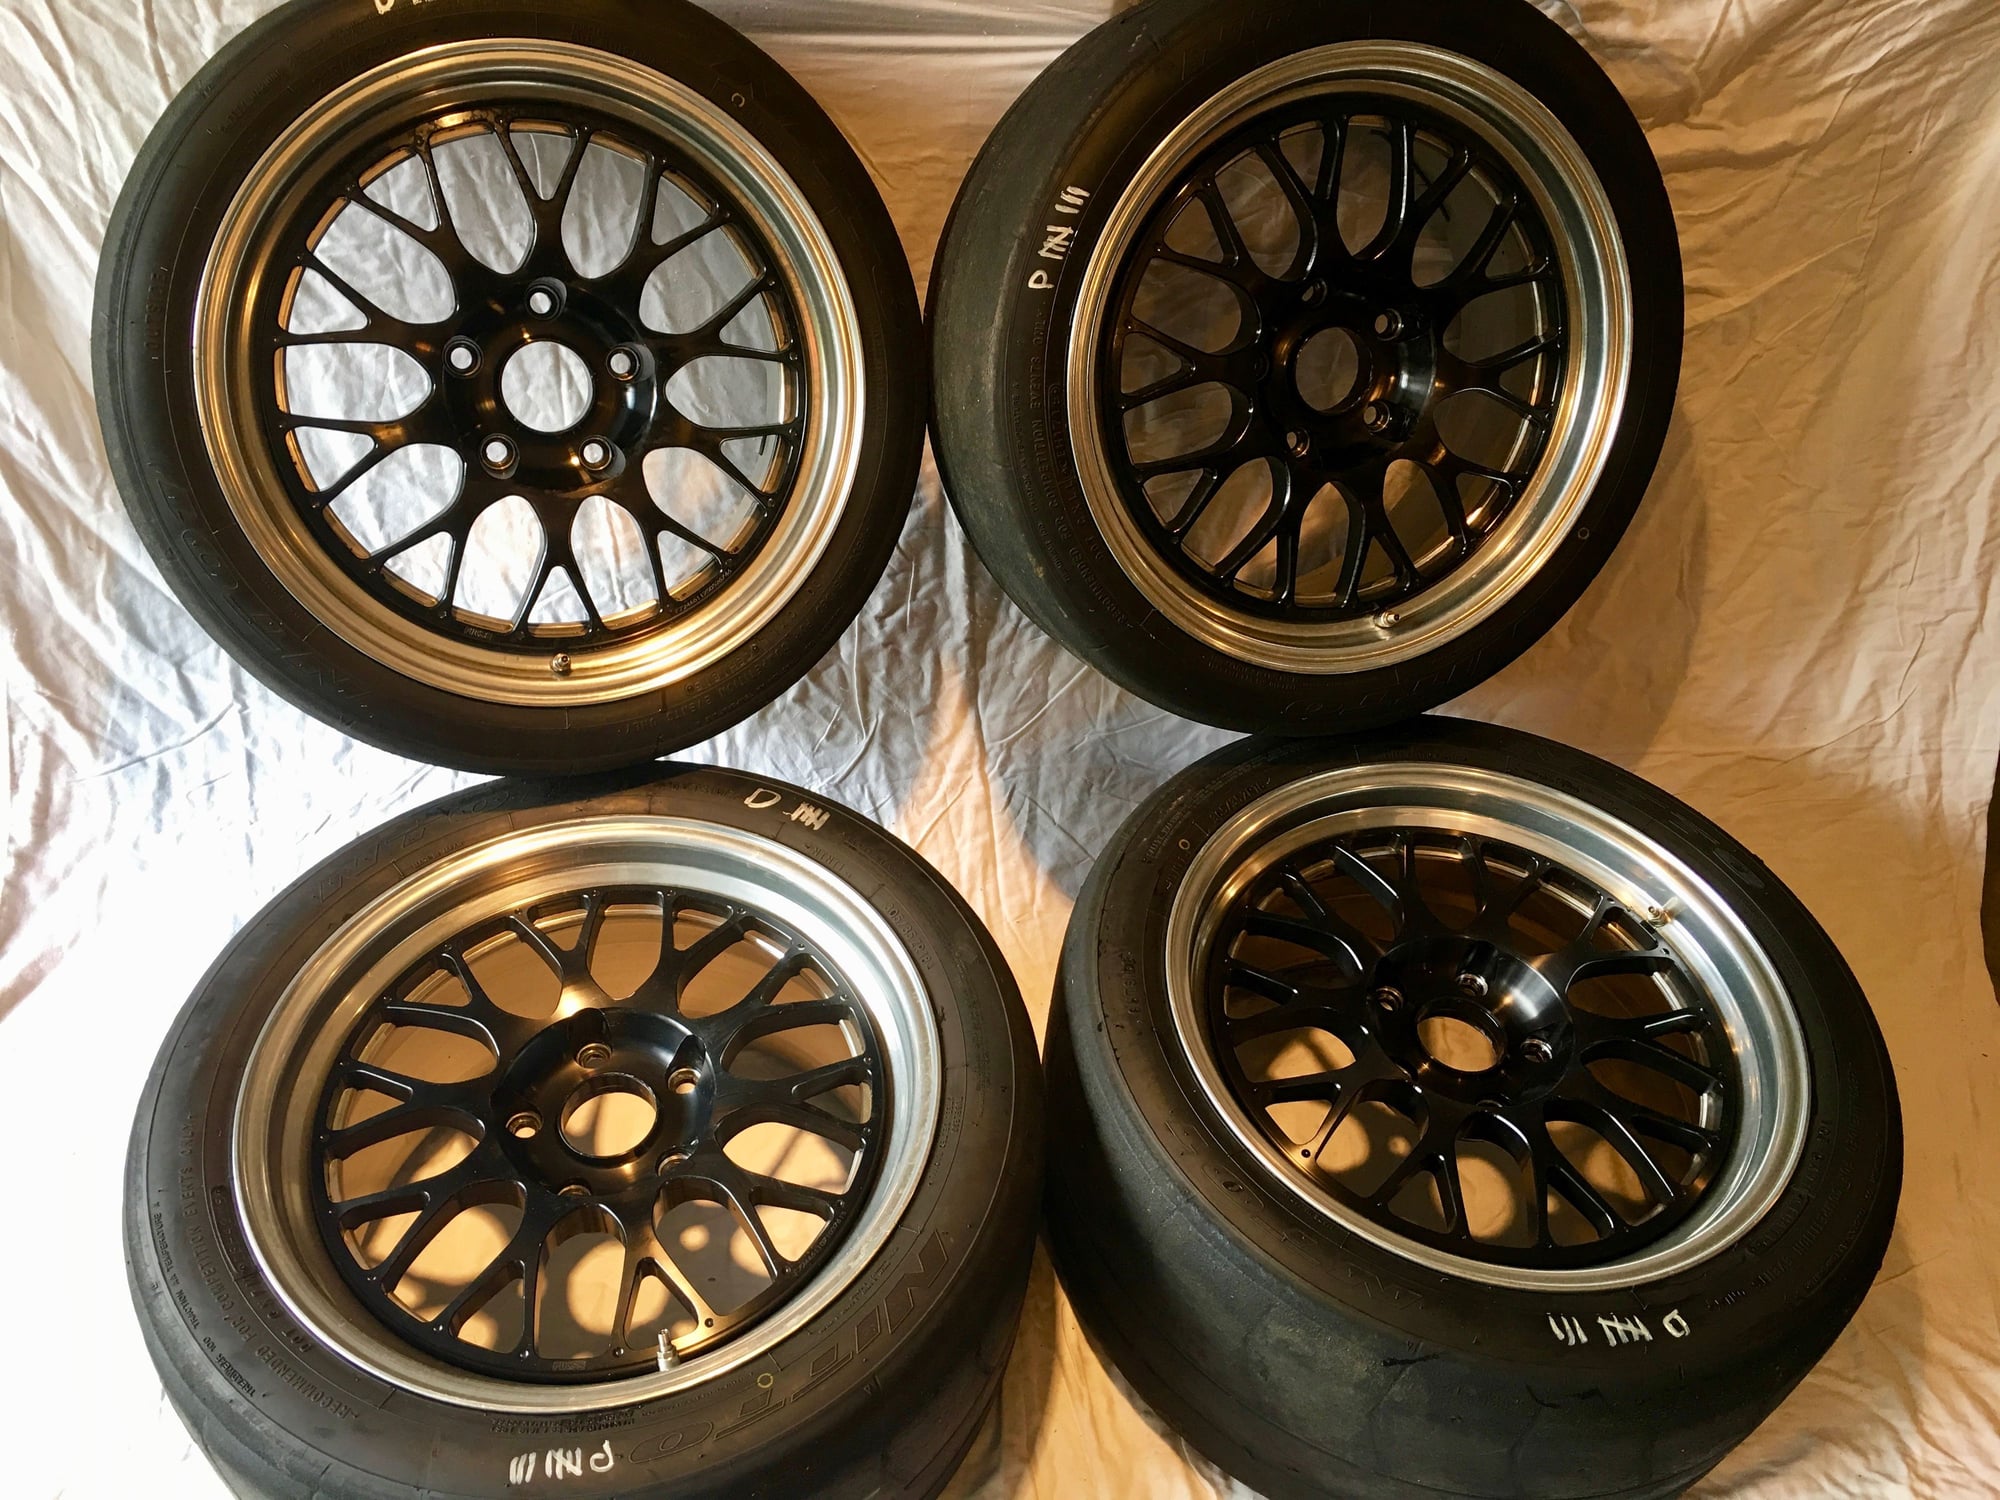 Wheels and Tires/Axles - 18" Fikse Profil 10 w Nitto NT01 (996/997 NB Fitment) - Used - 2004 to 2007 Porsche GT3 - 1999 to 2012 Porsche 911 - Seattle, WA 98144, United States